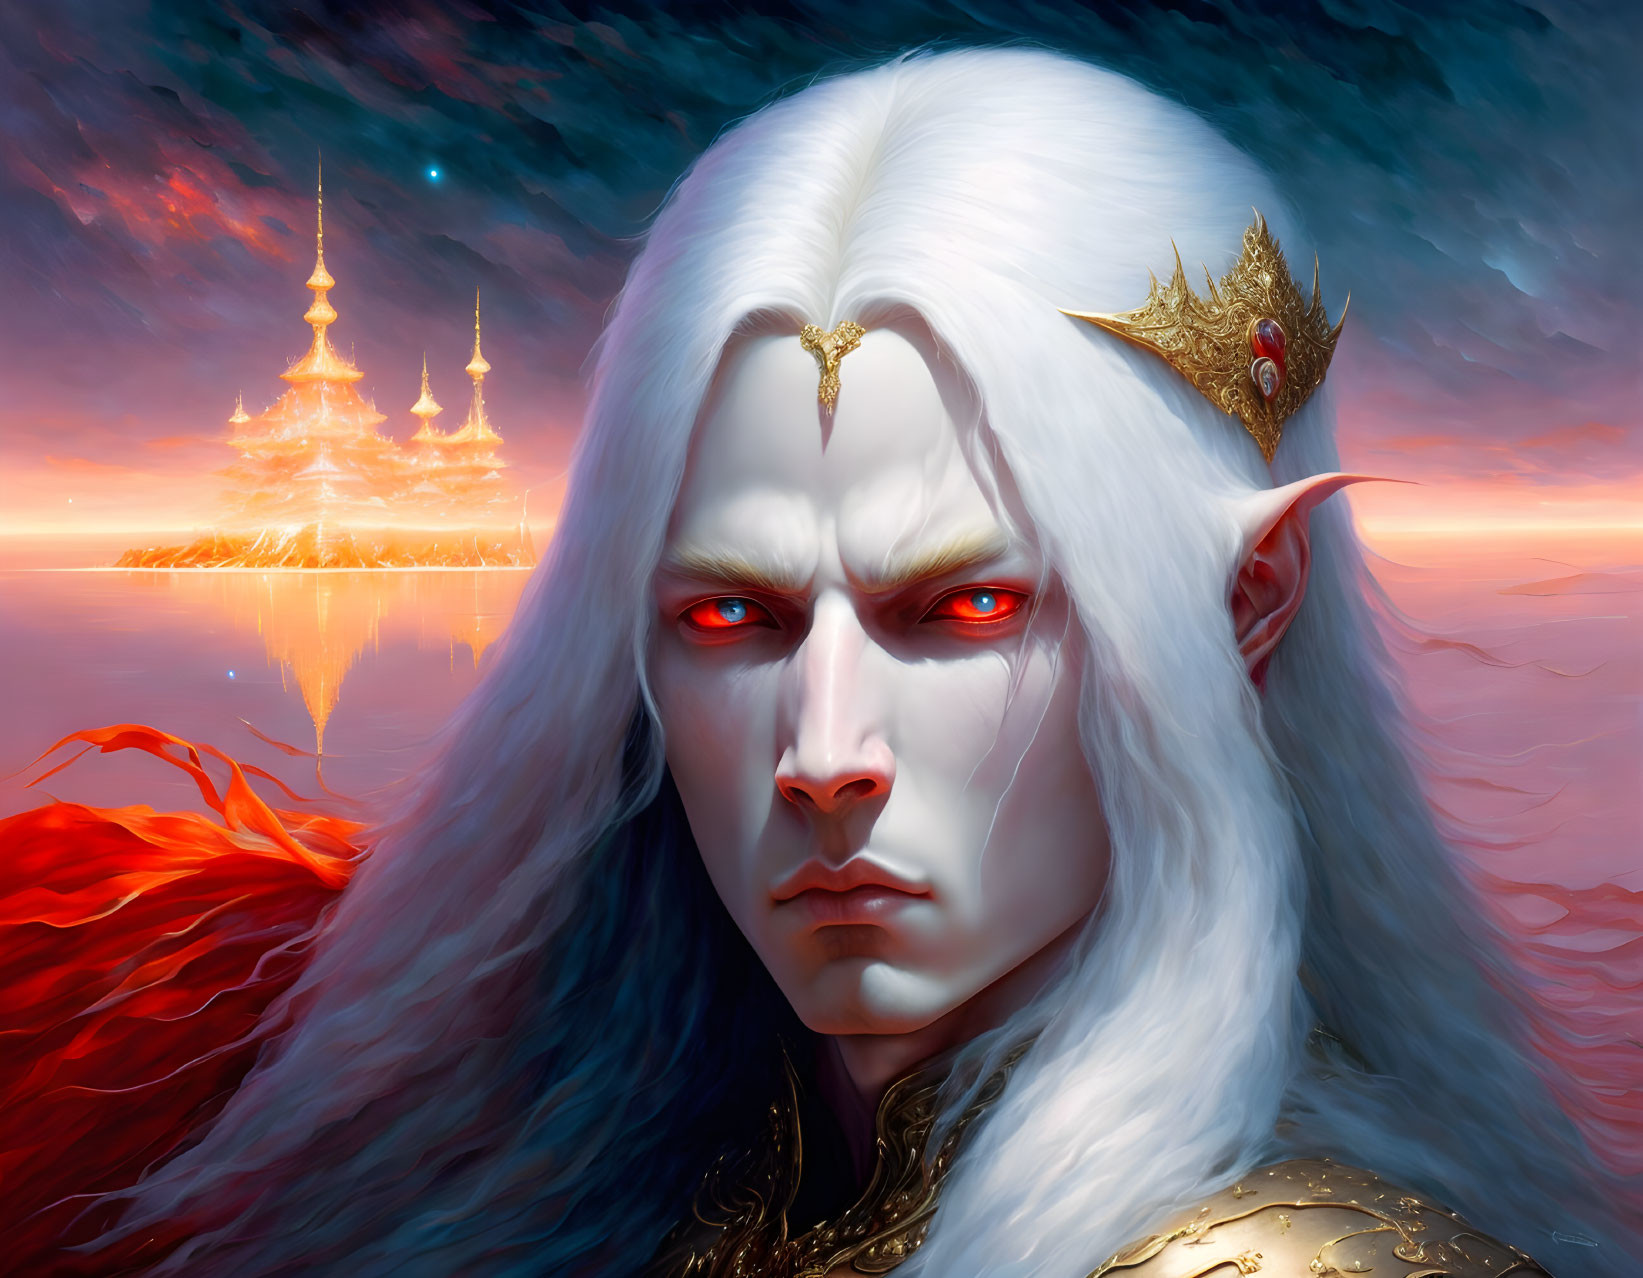 White-haired fantasy figure with red eyes, crown, and fiery cloak in front of ethereal castle